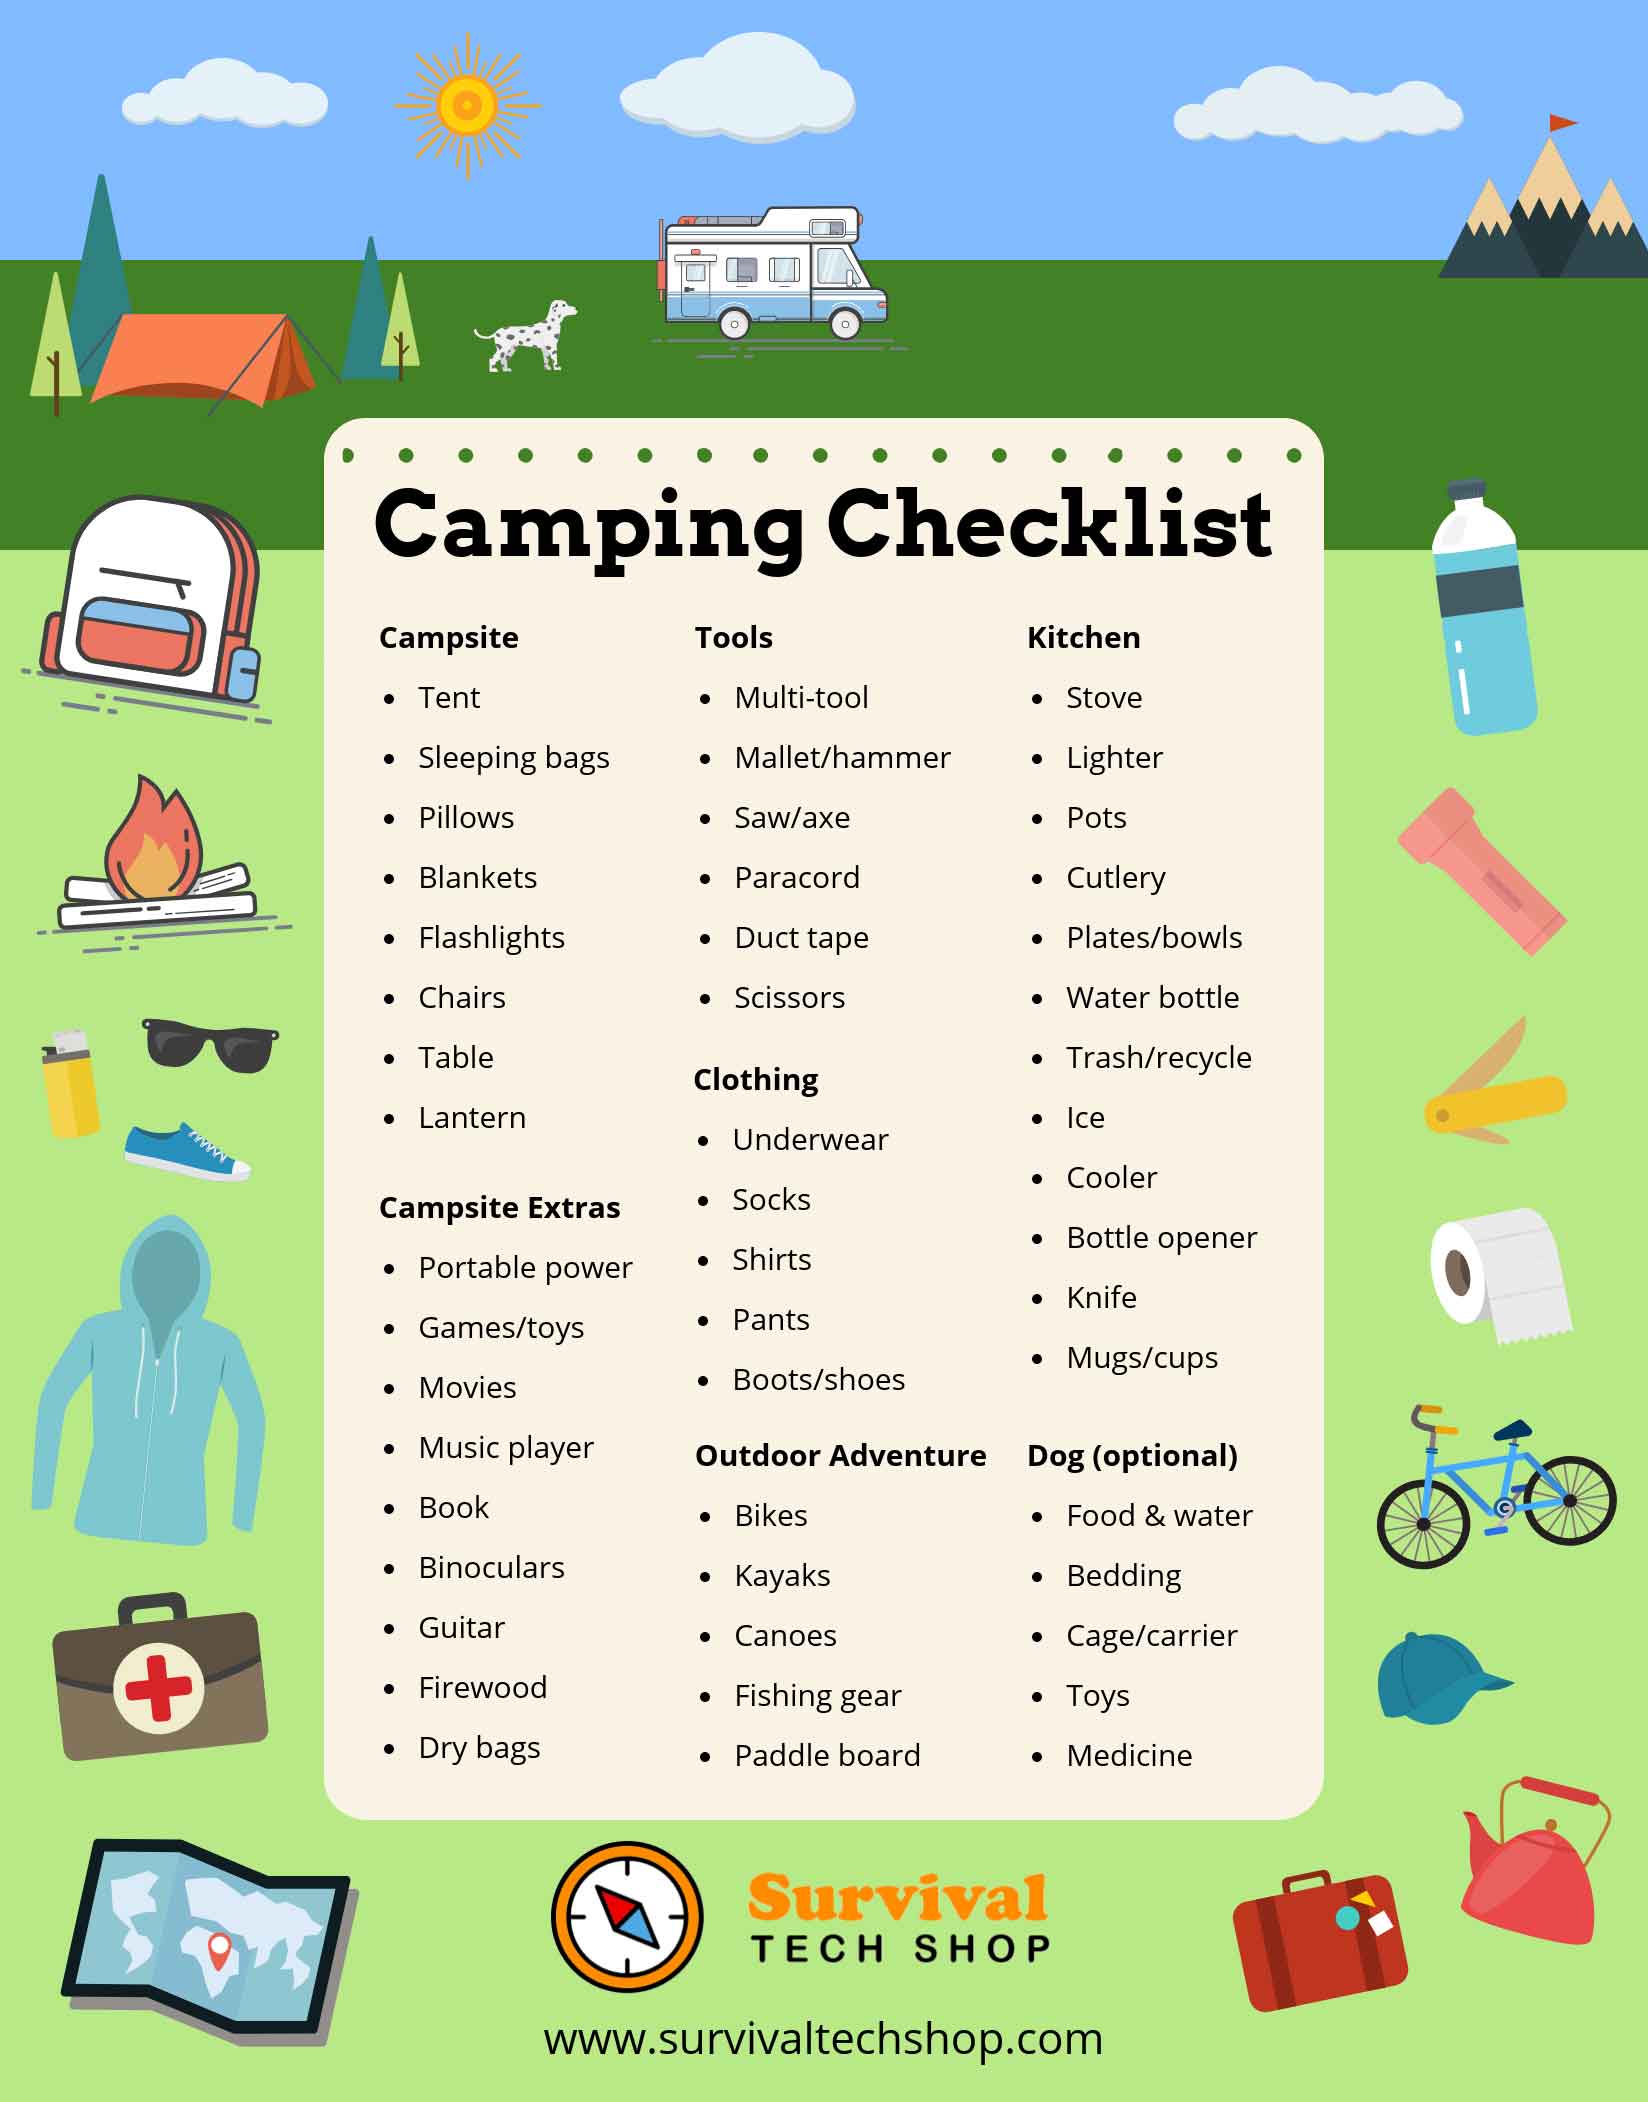 Questions about camps. Camping Checklist. Английские слова на тему Camping. Тема поход на английском. Вещи для похода на английском.